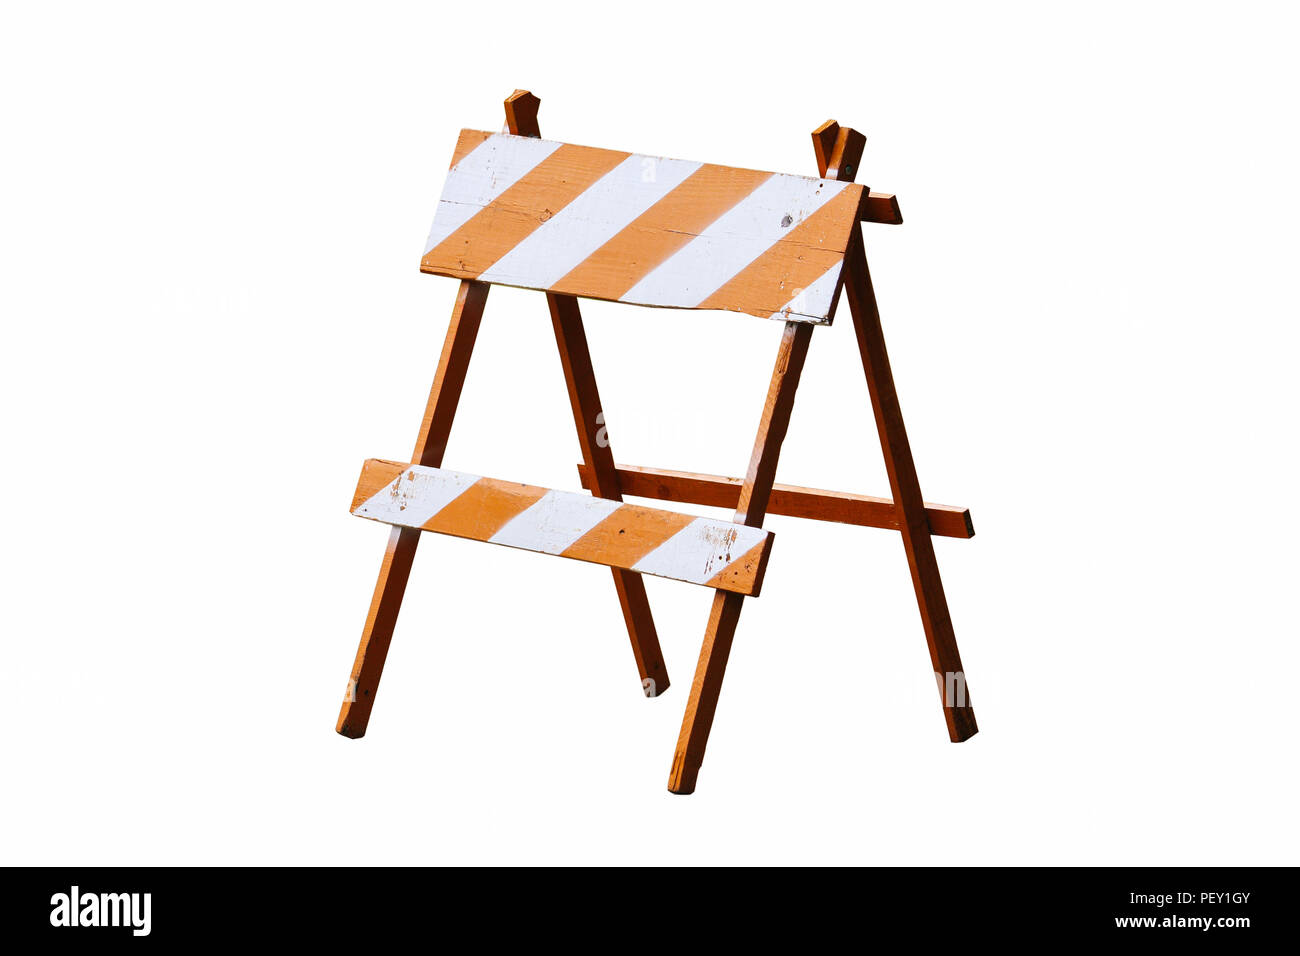 Orange and white painted vintage wooden road block or barrier as wood frame barricade with four legs isolated on a seamless white background. Stock Photo